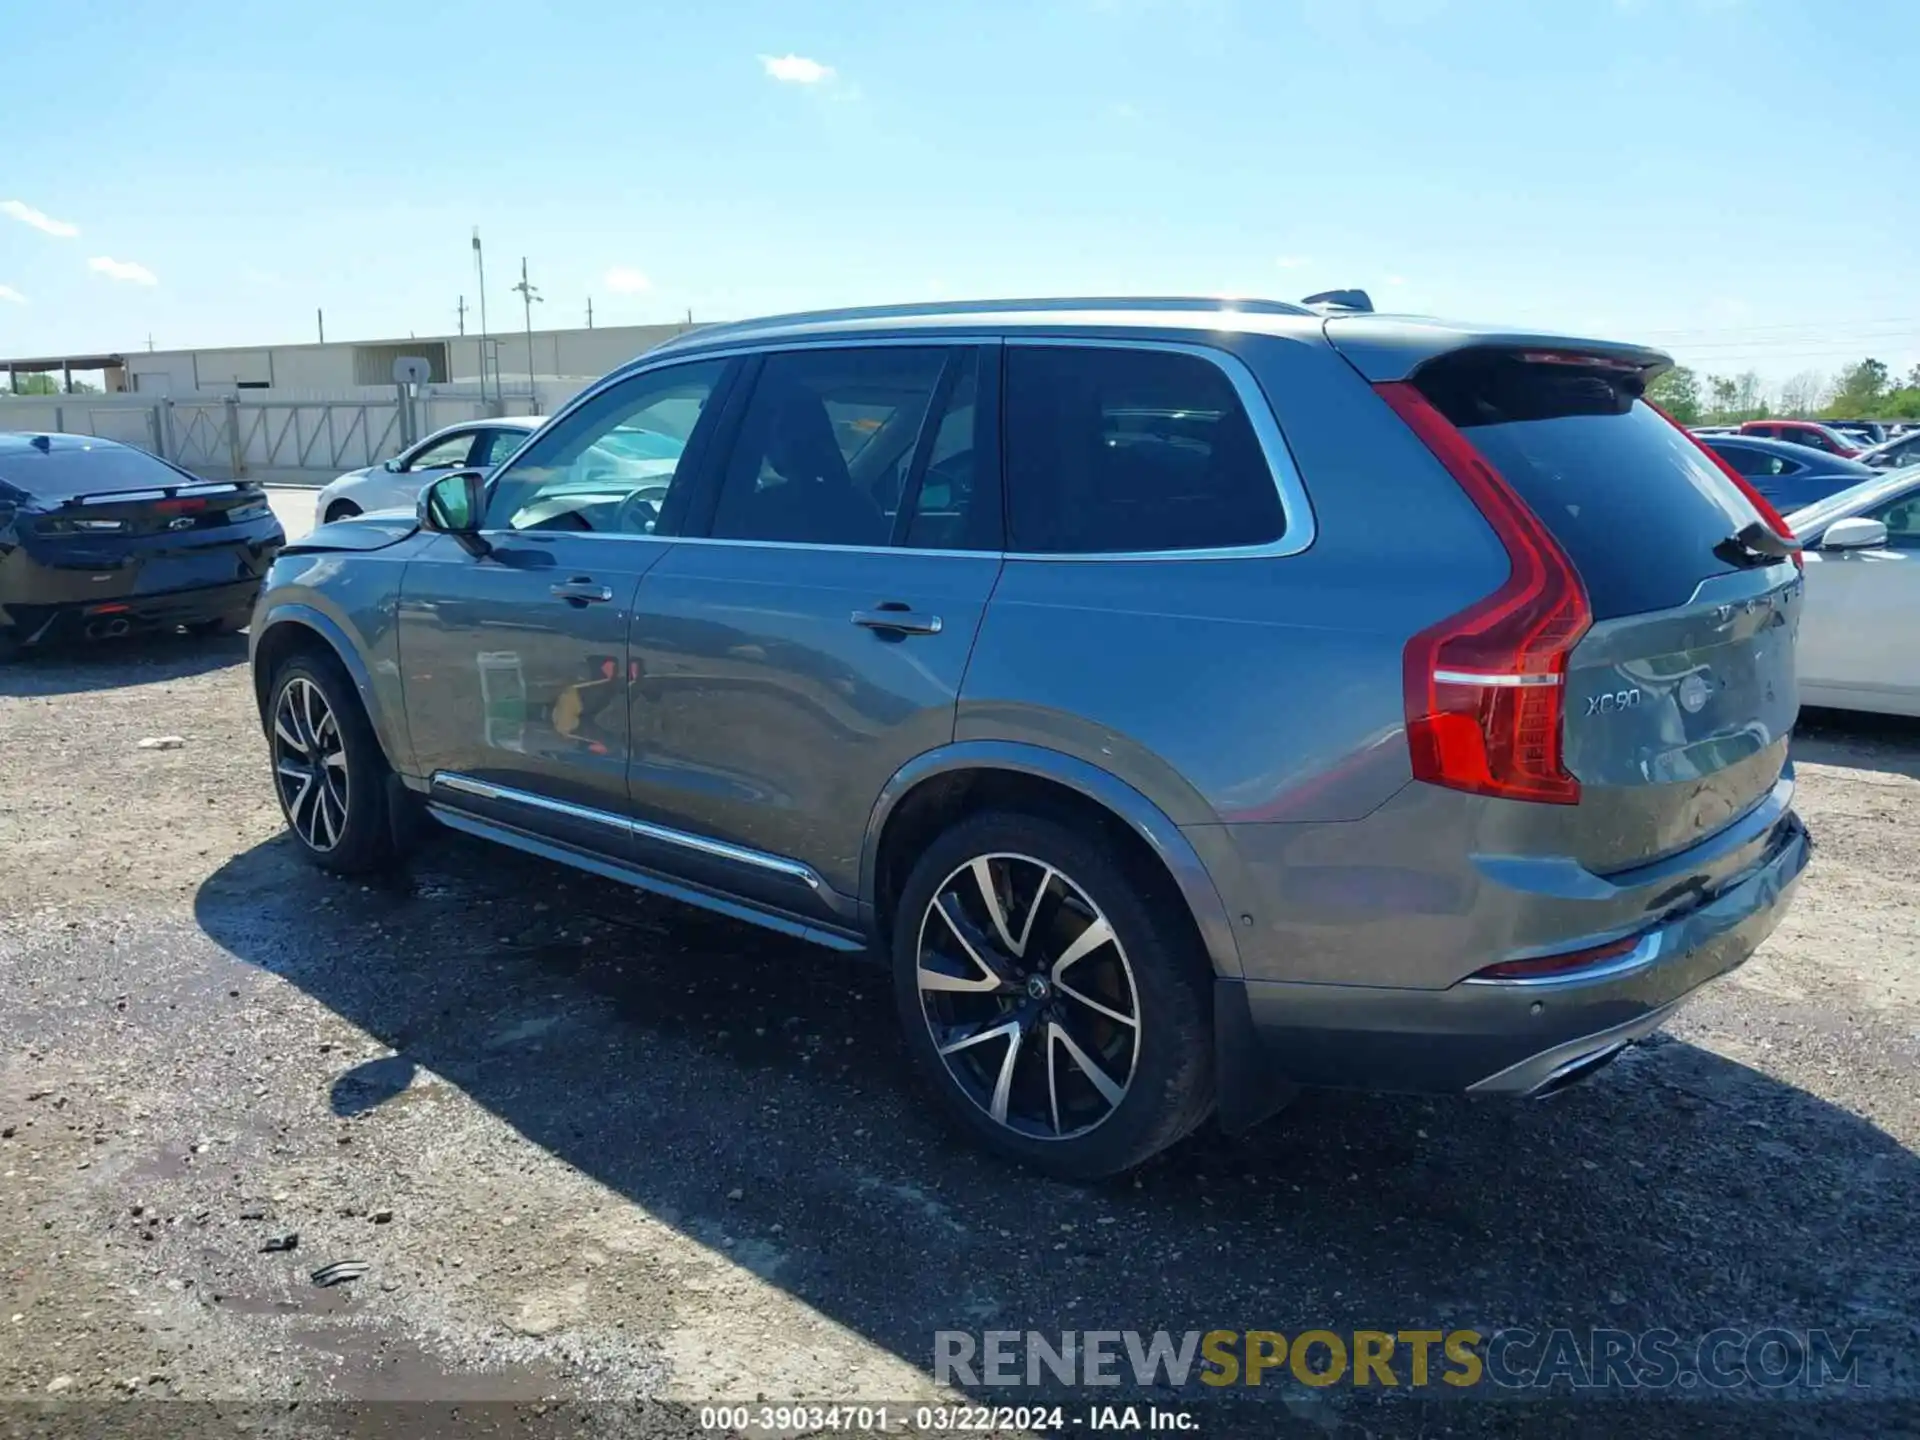 3 Photograph of a damaged car YV4A22PL8K1430475 VOLVO XC90 2019